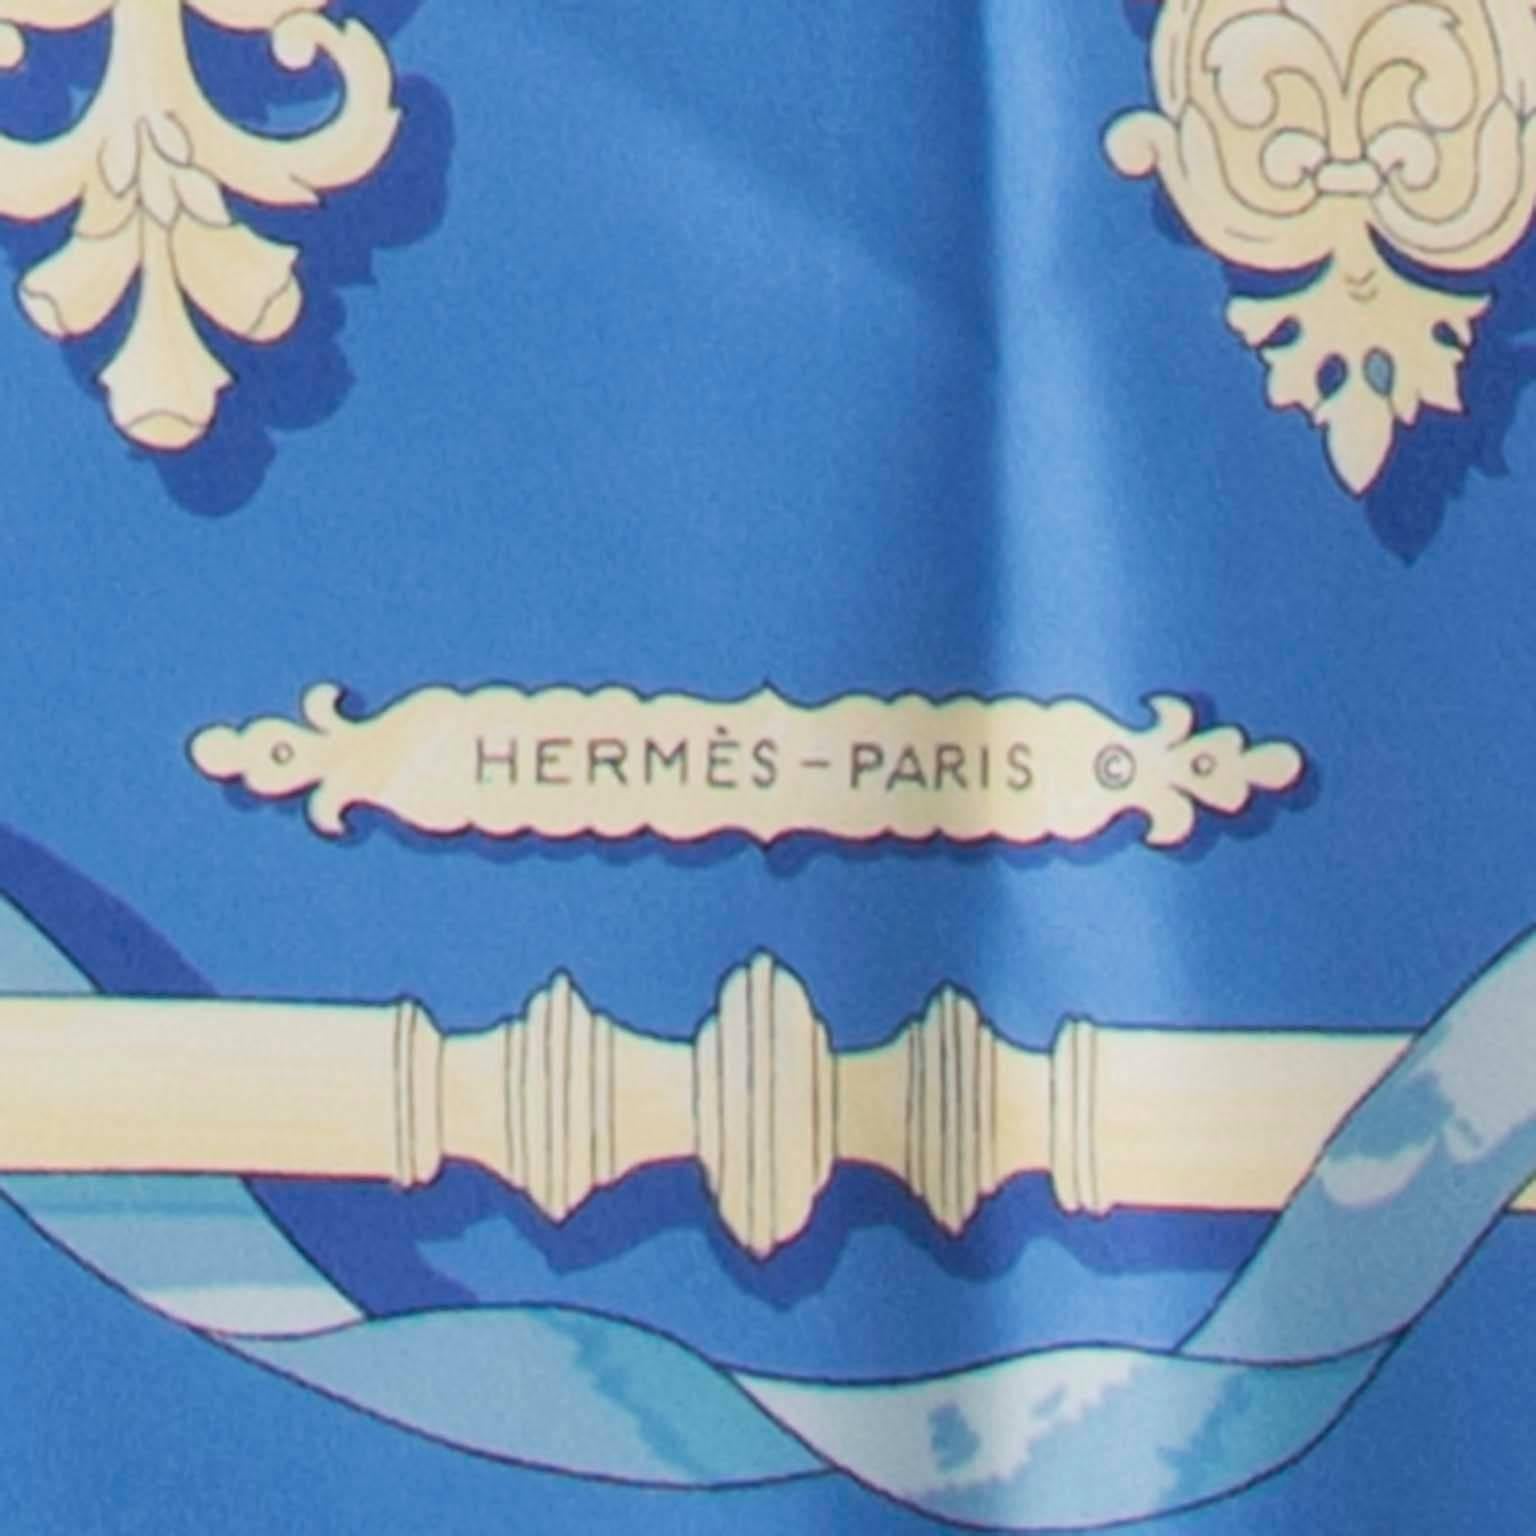 Lovely Hermes scarf in different shades of blue. 100% Silk.